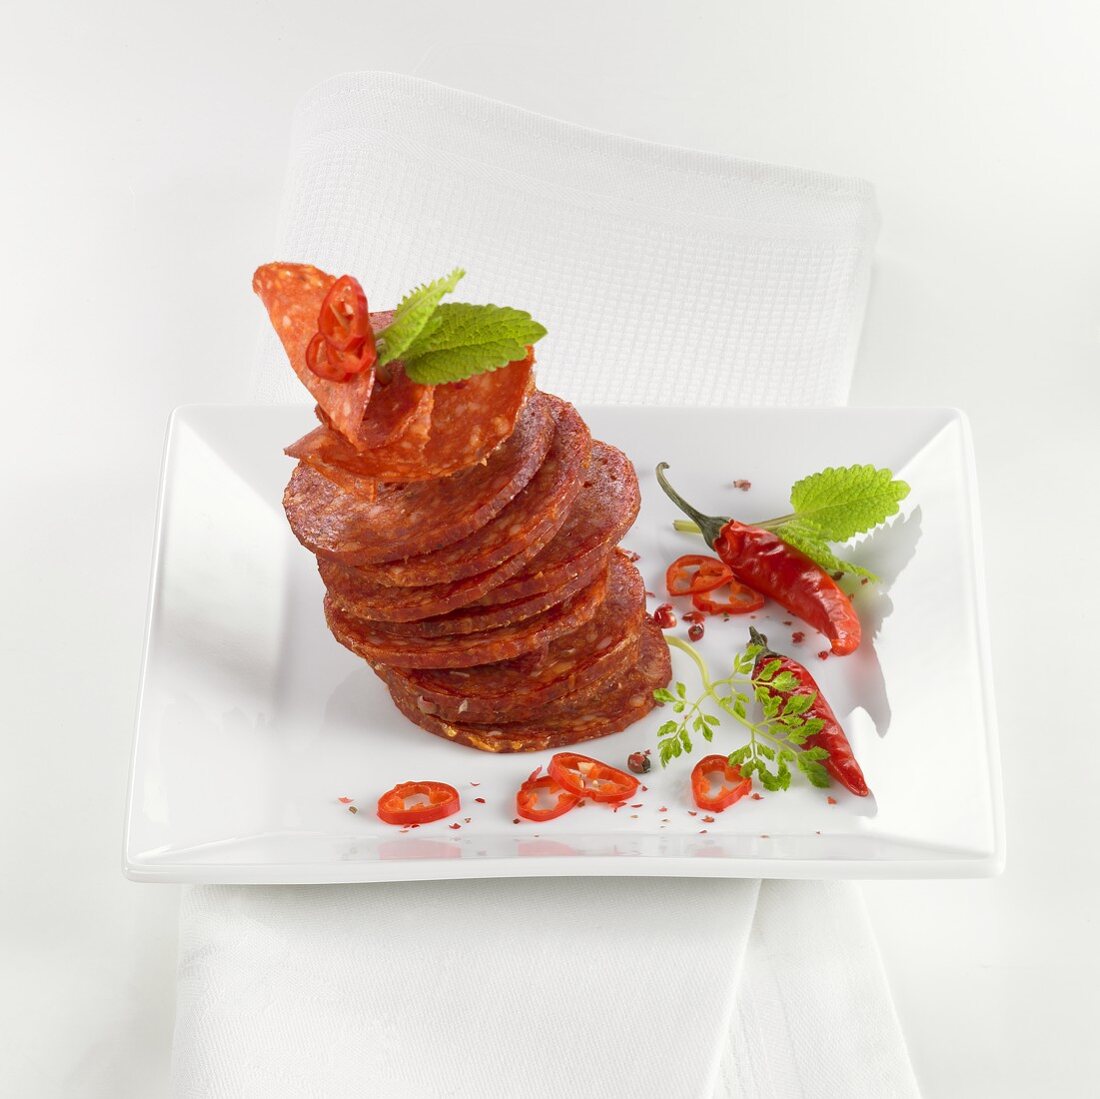 Tower of salami slices with chilli rings